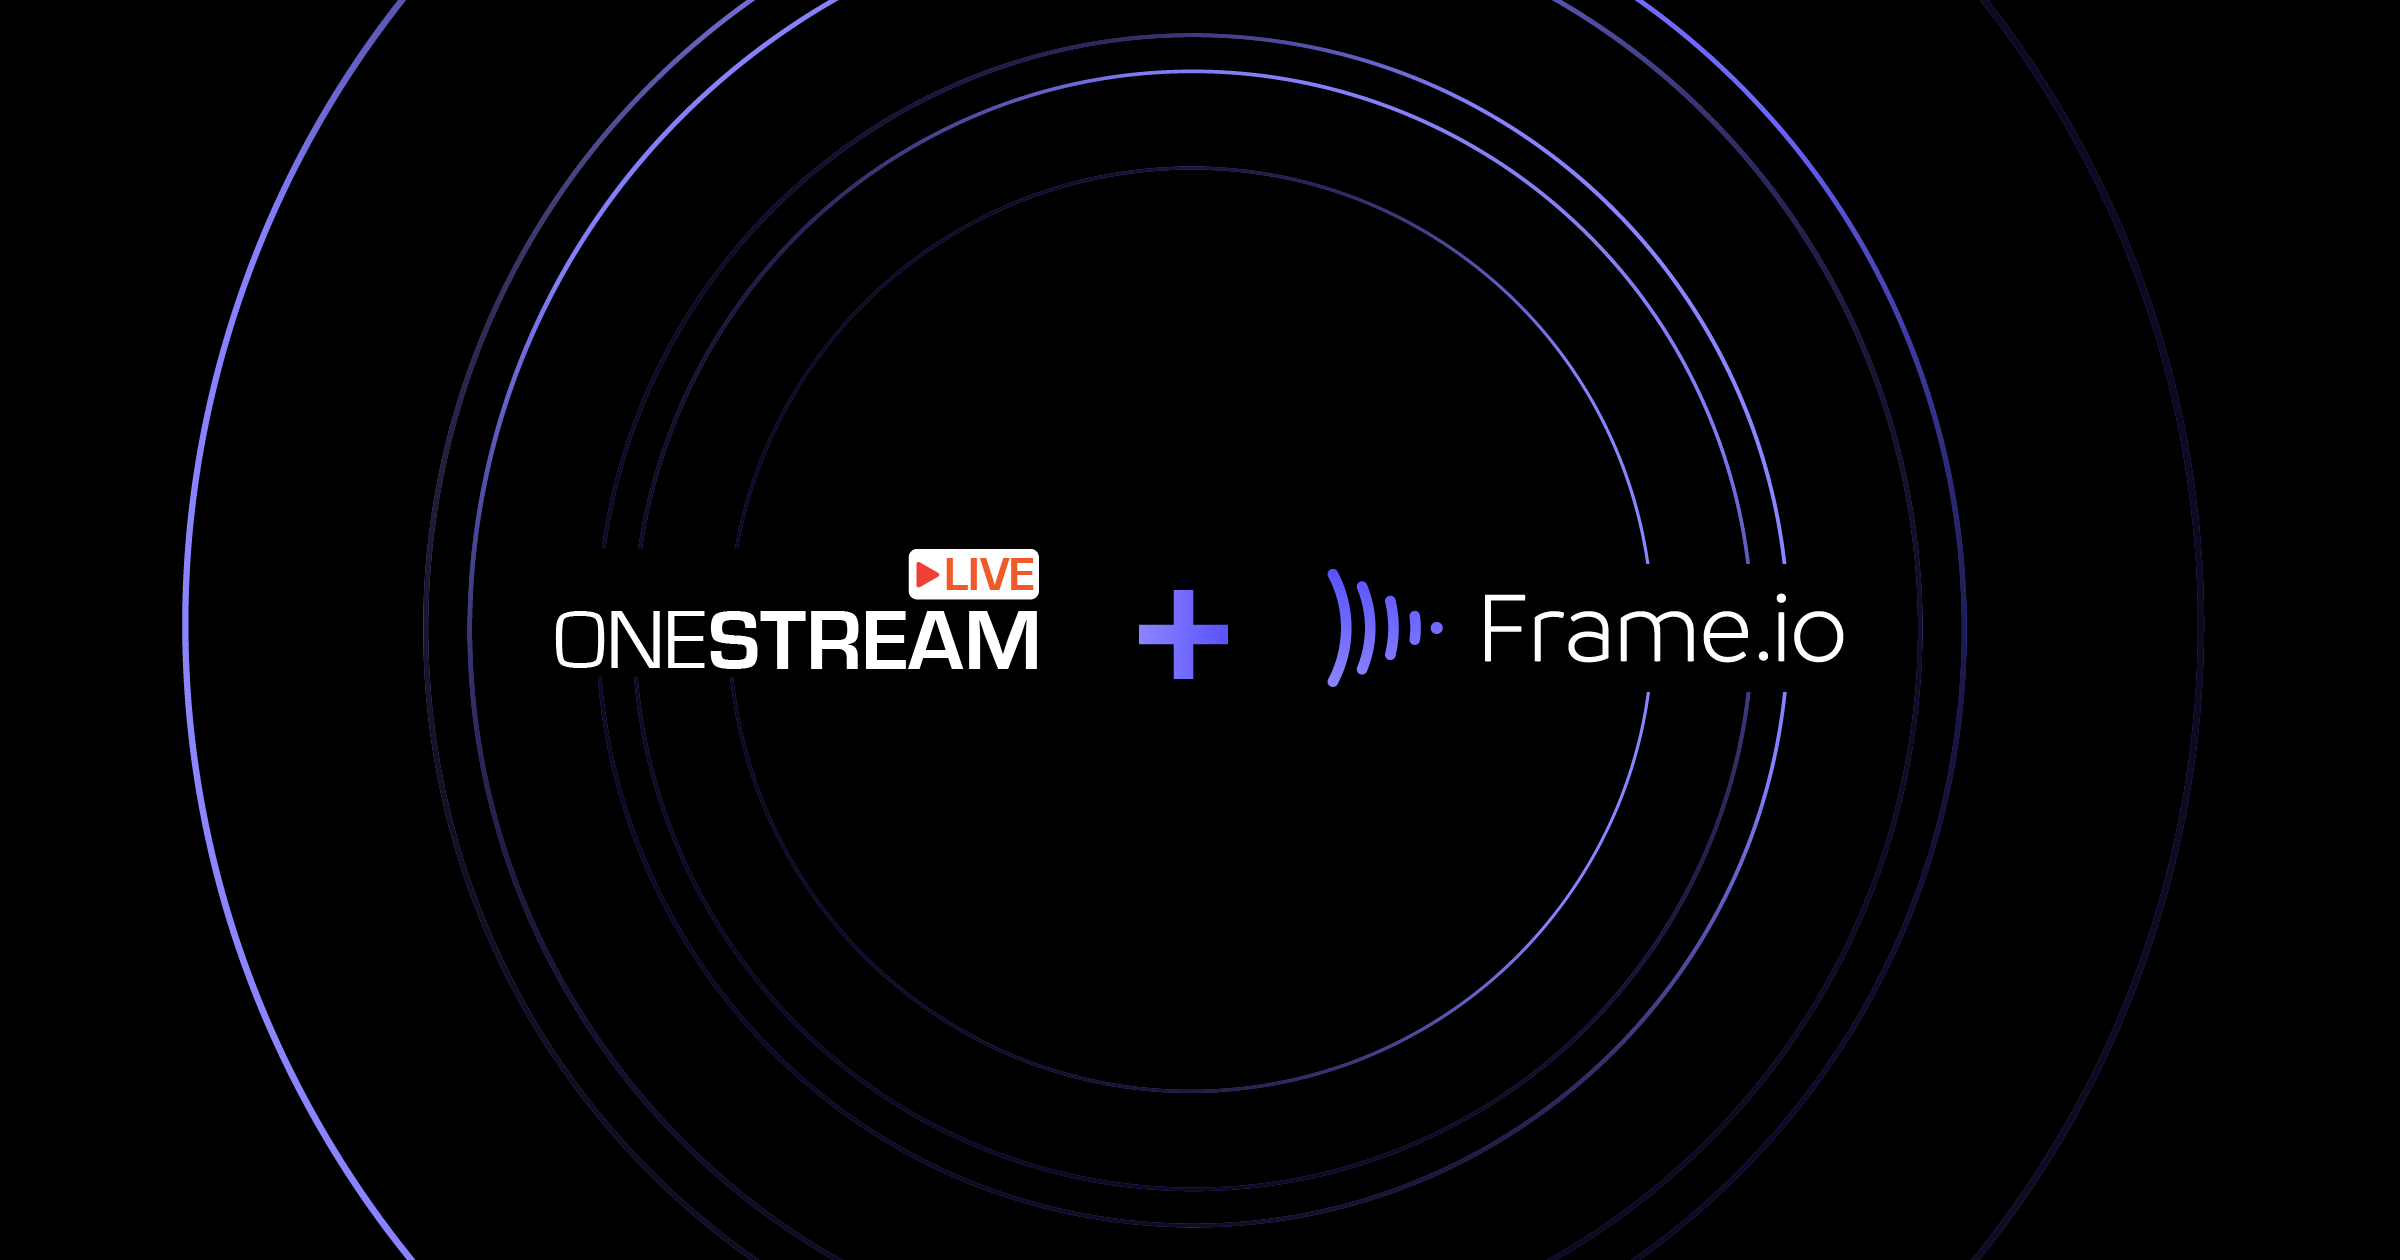 How to Integrate Frame.io with OneStream Live